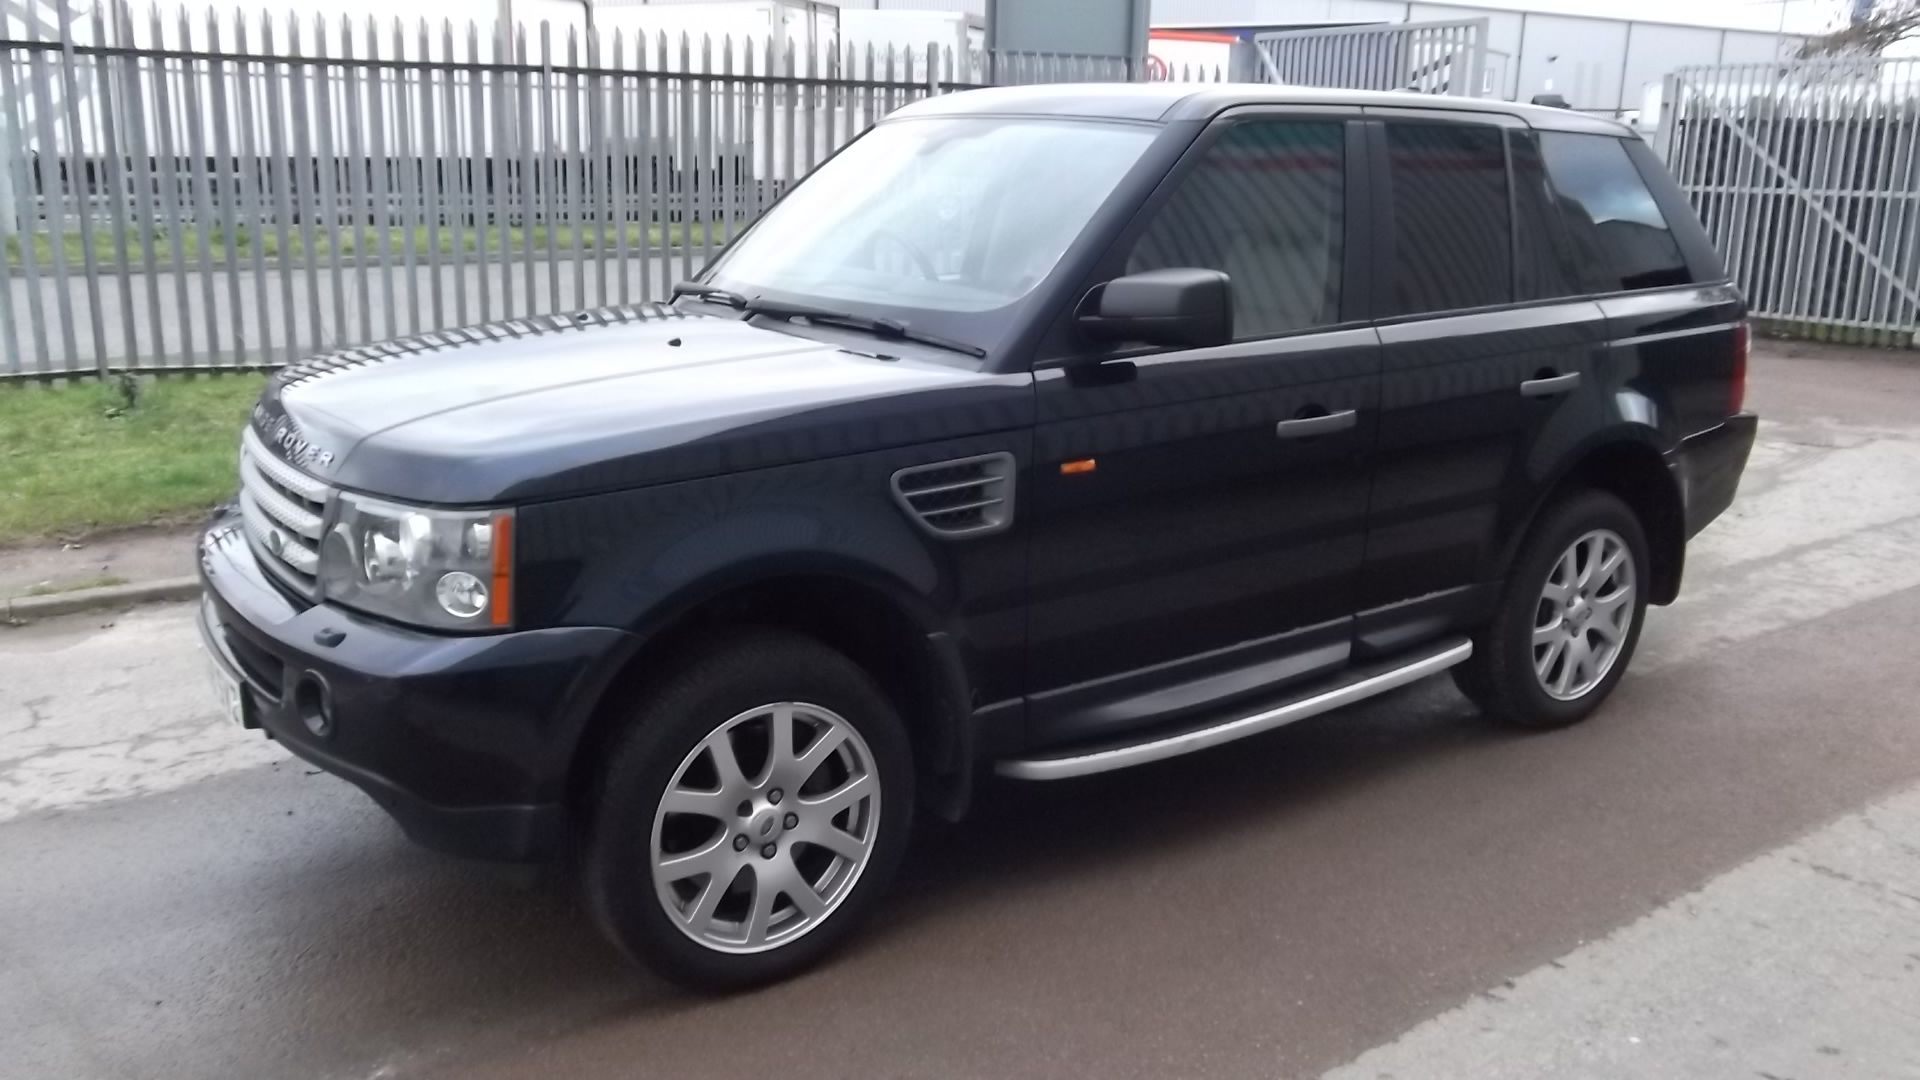 2008 Land Rover Range Rover Sp Hse 2.7 Tdv6 A 5Dr SUV - CL505 - NO VAT ON THE HAMMER - Location: Cor - Image 3 of 15